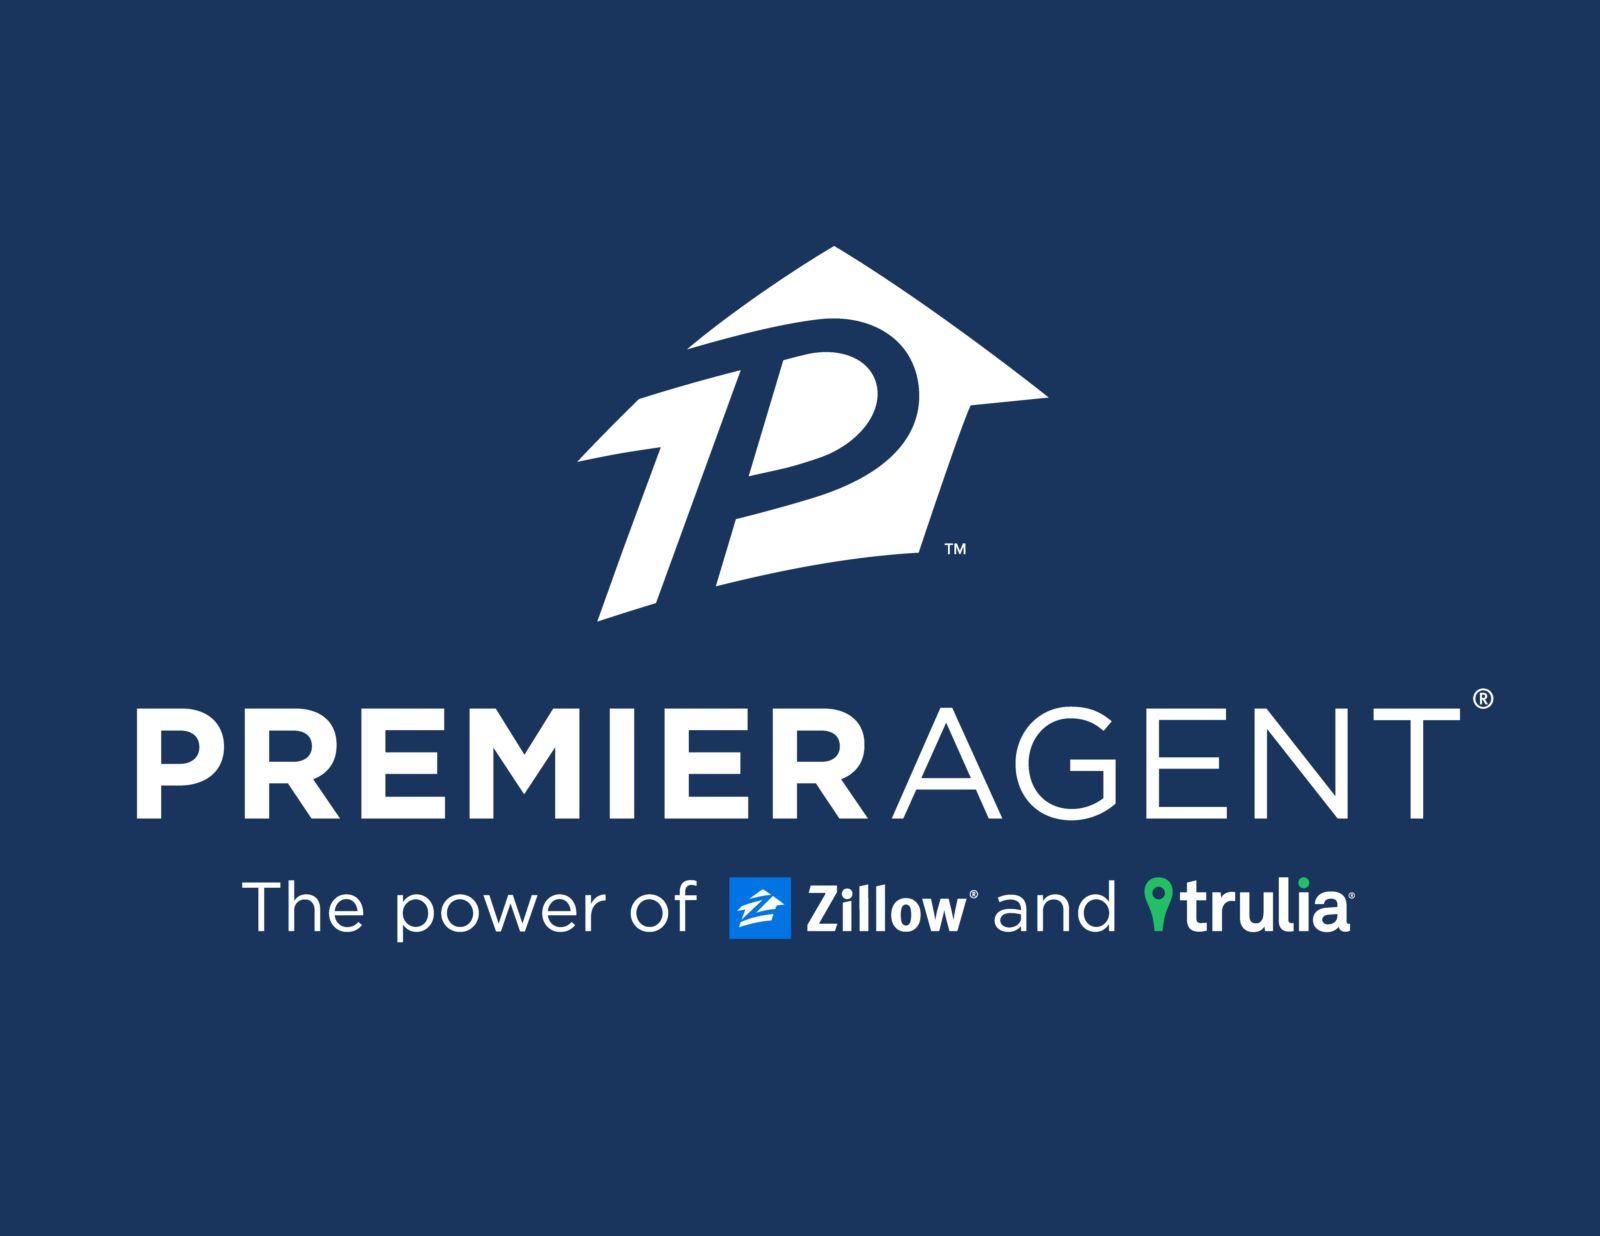 Zillow Review Logo - Logos. Premier Agent Resources